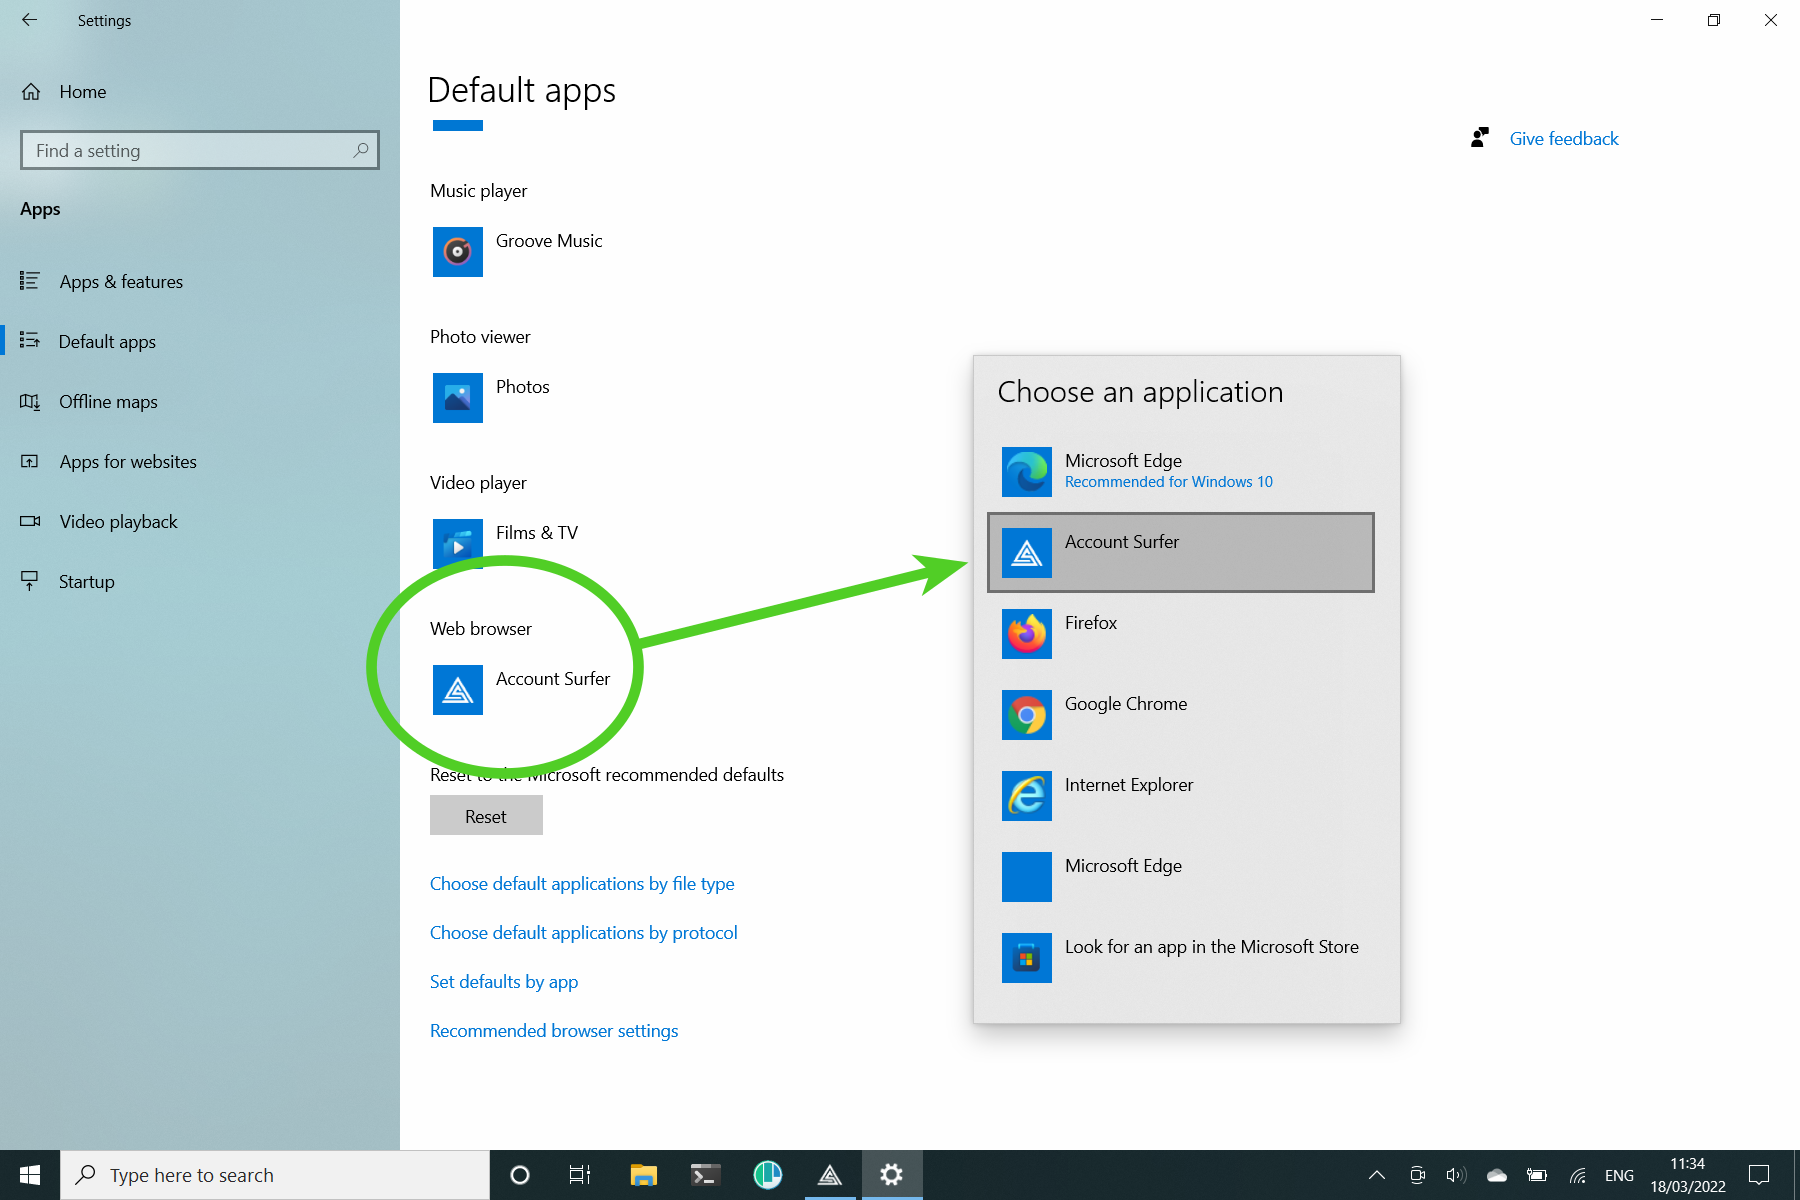 The windows default apps settings showing how to select Account Surfer